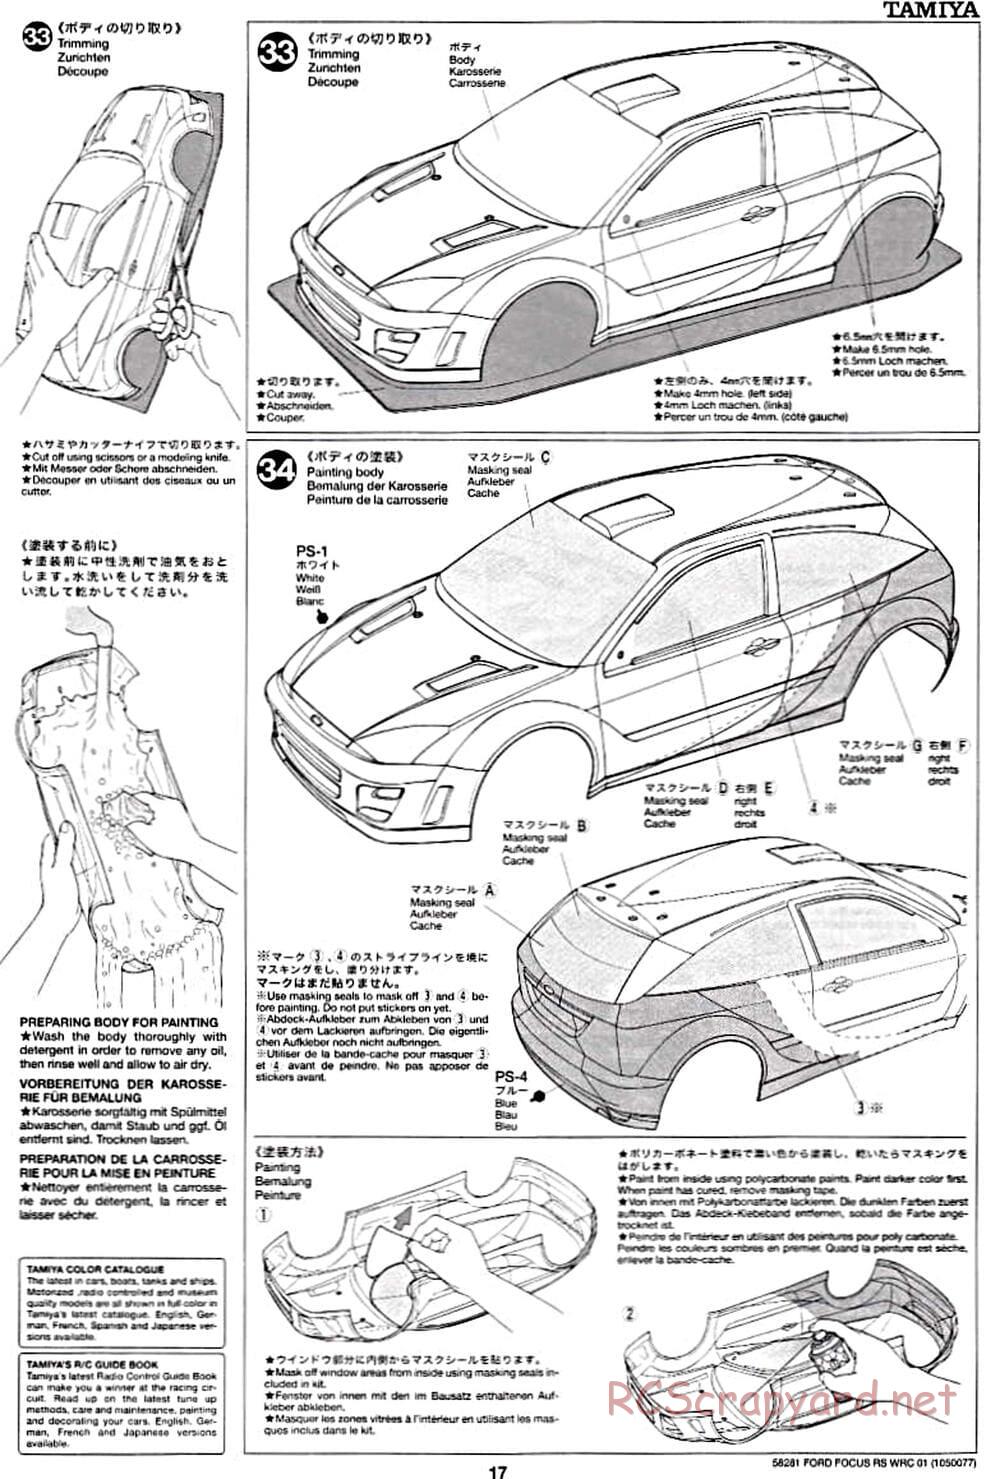 Tamiya - Ford Focus RS WRC 01 - TB-01 Chassis - Manual - Page 17